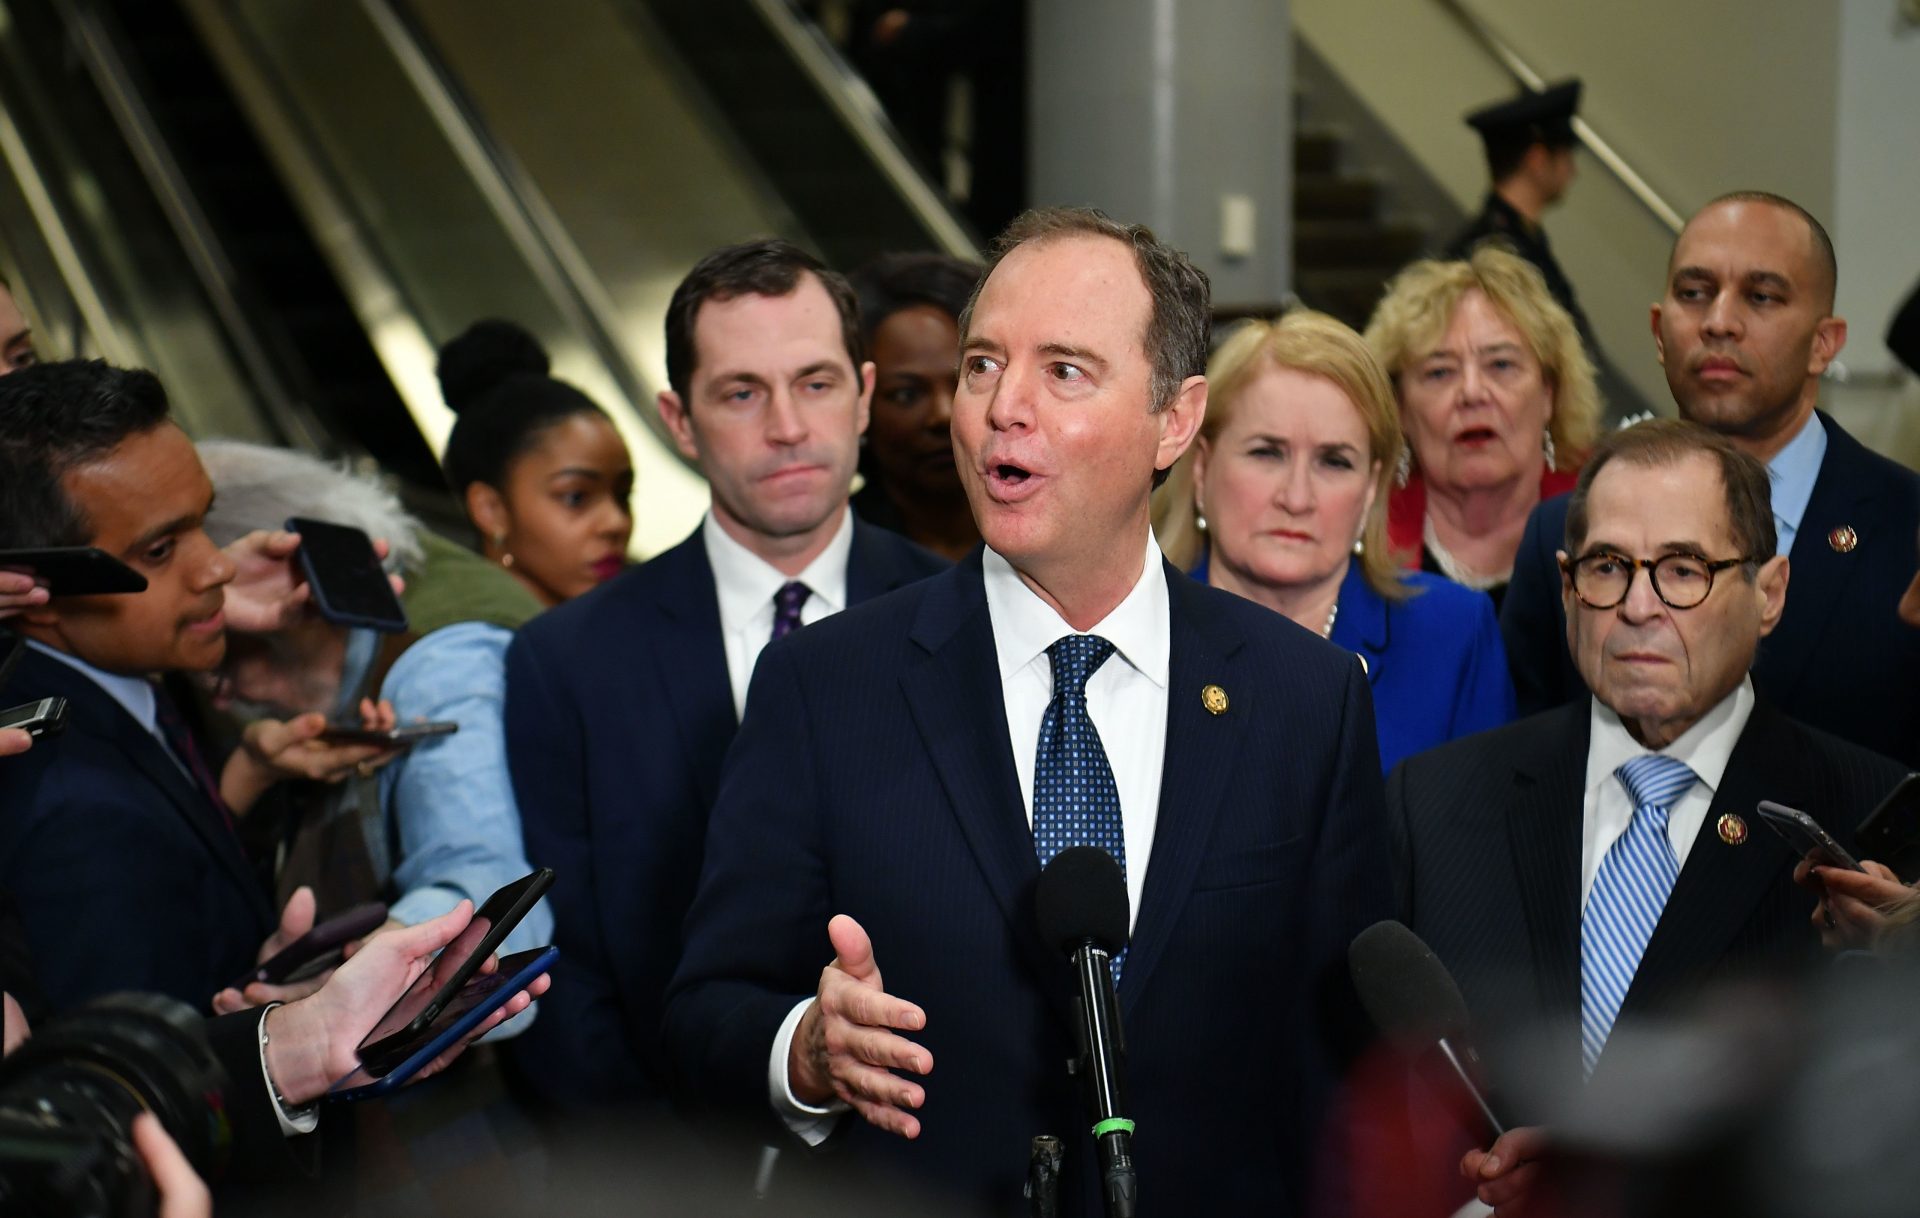 Lead House manager Adam Schiff speaks to the press at the U.S. Capitol on Wednesday ahead of the second day of President Trump's impeachment trial.